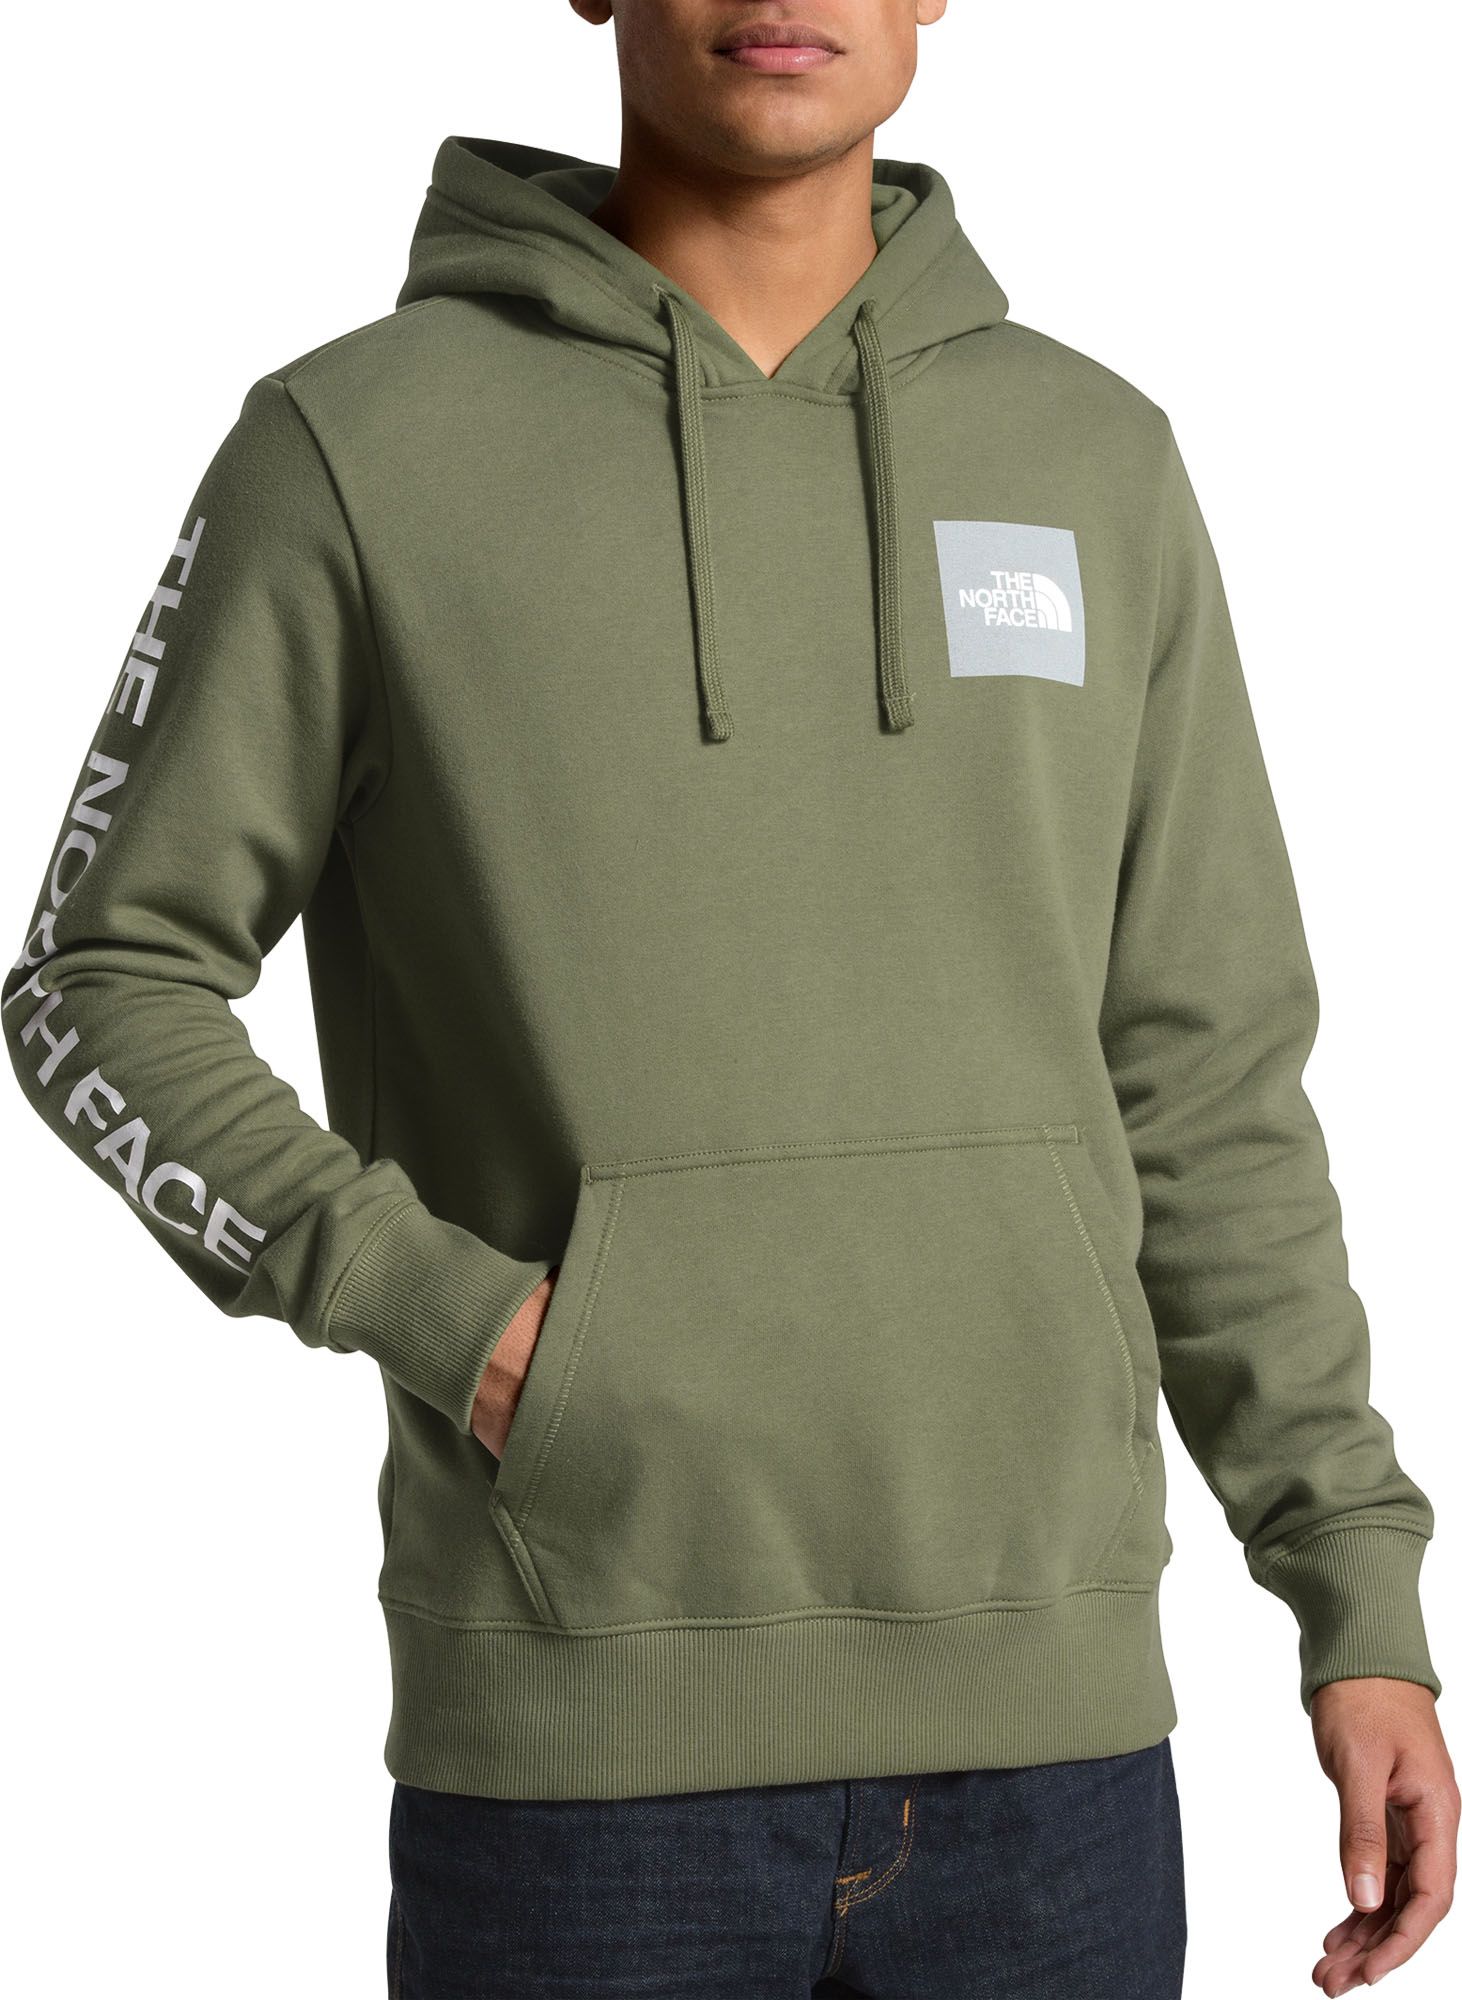 north face hoodie olive green